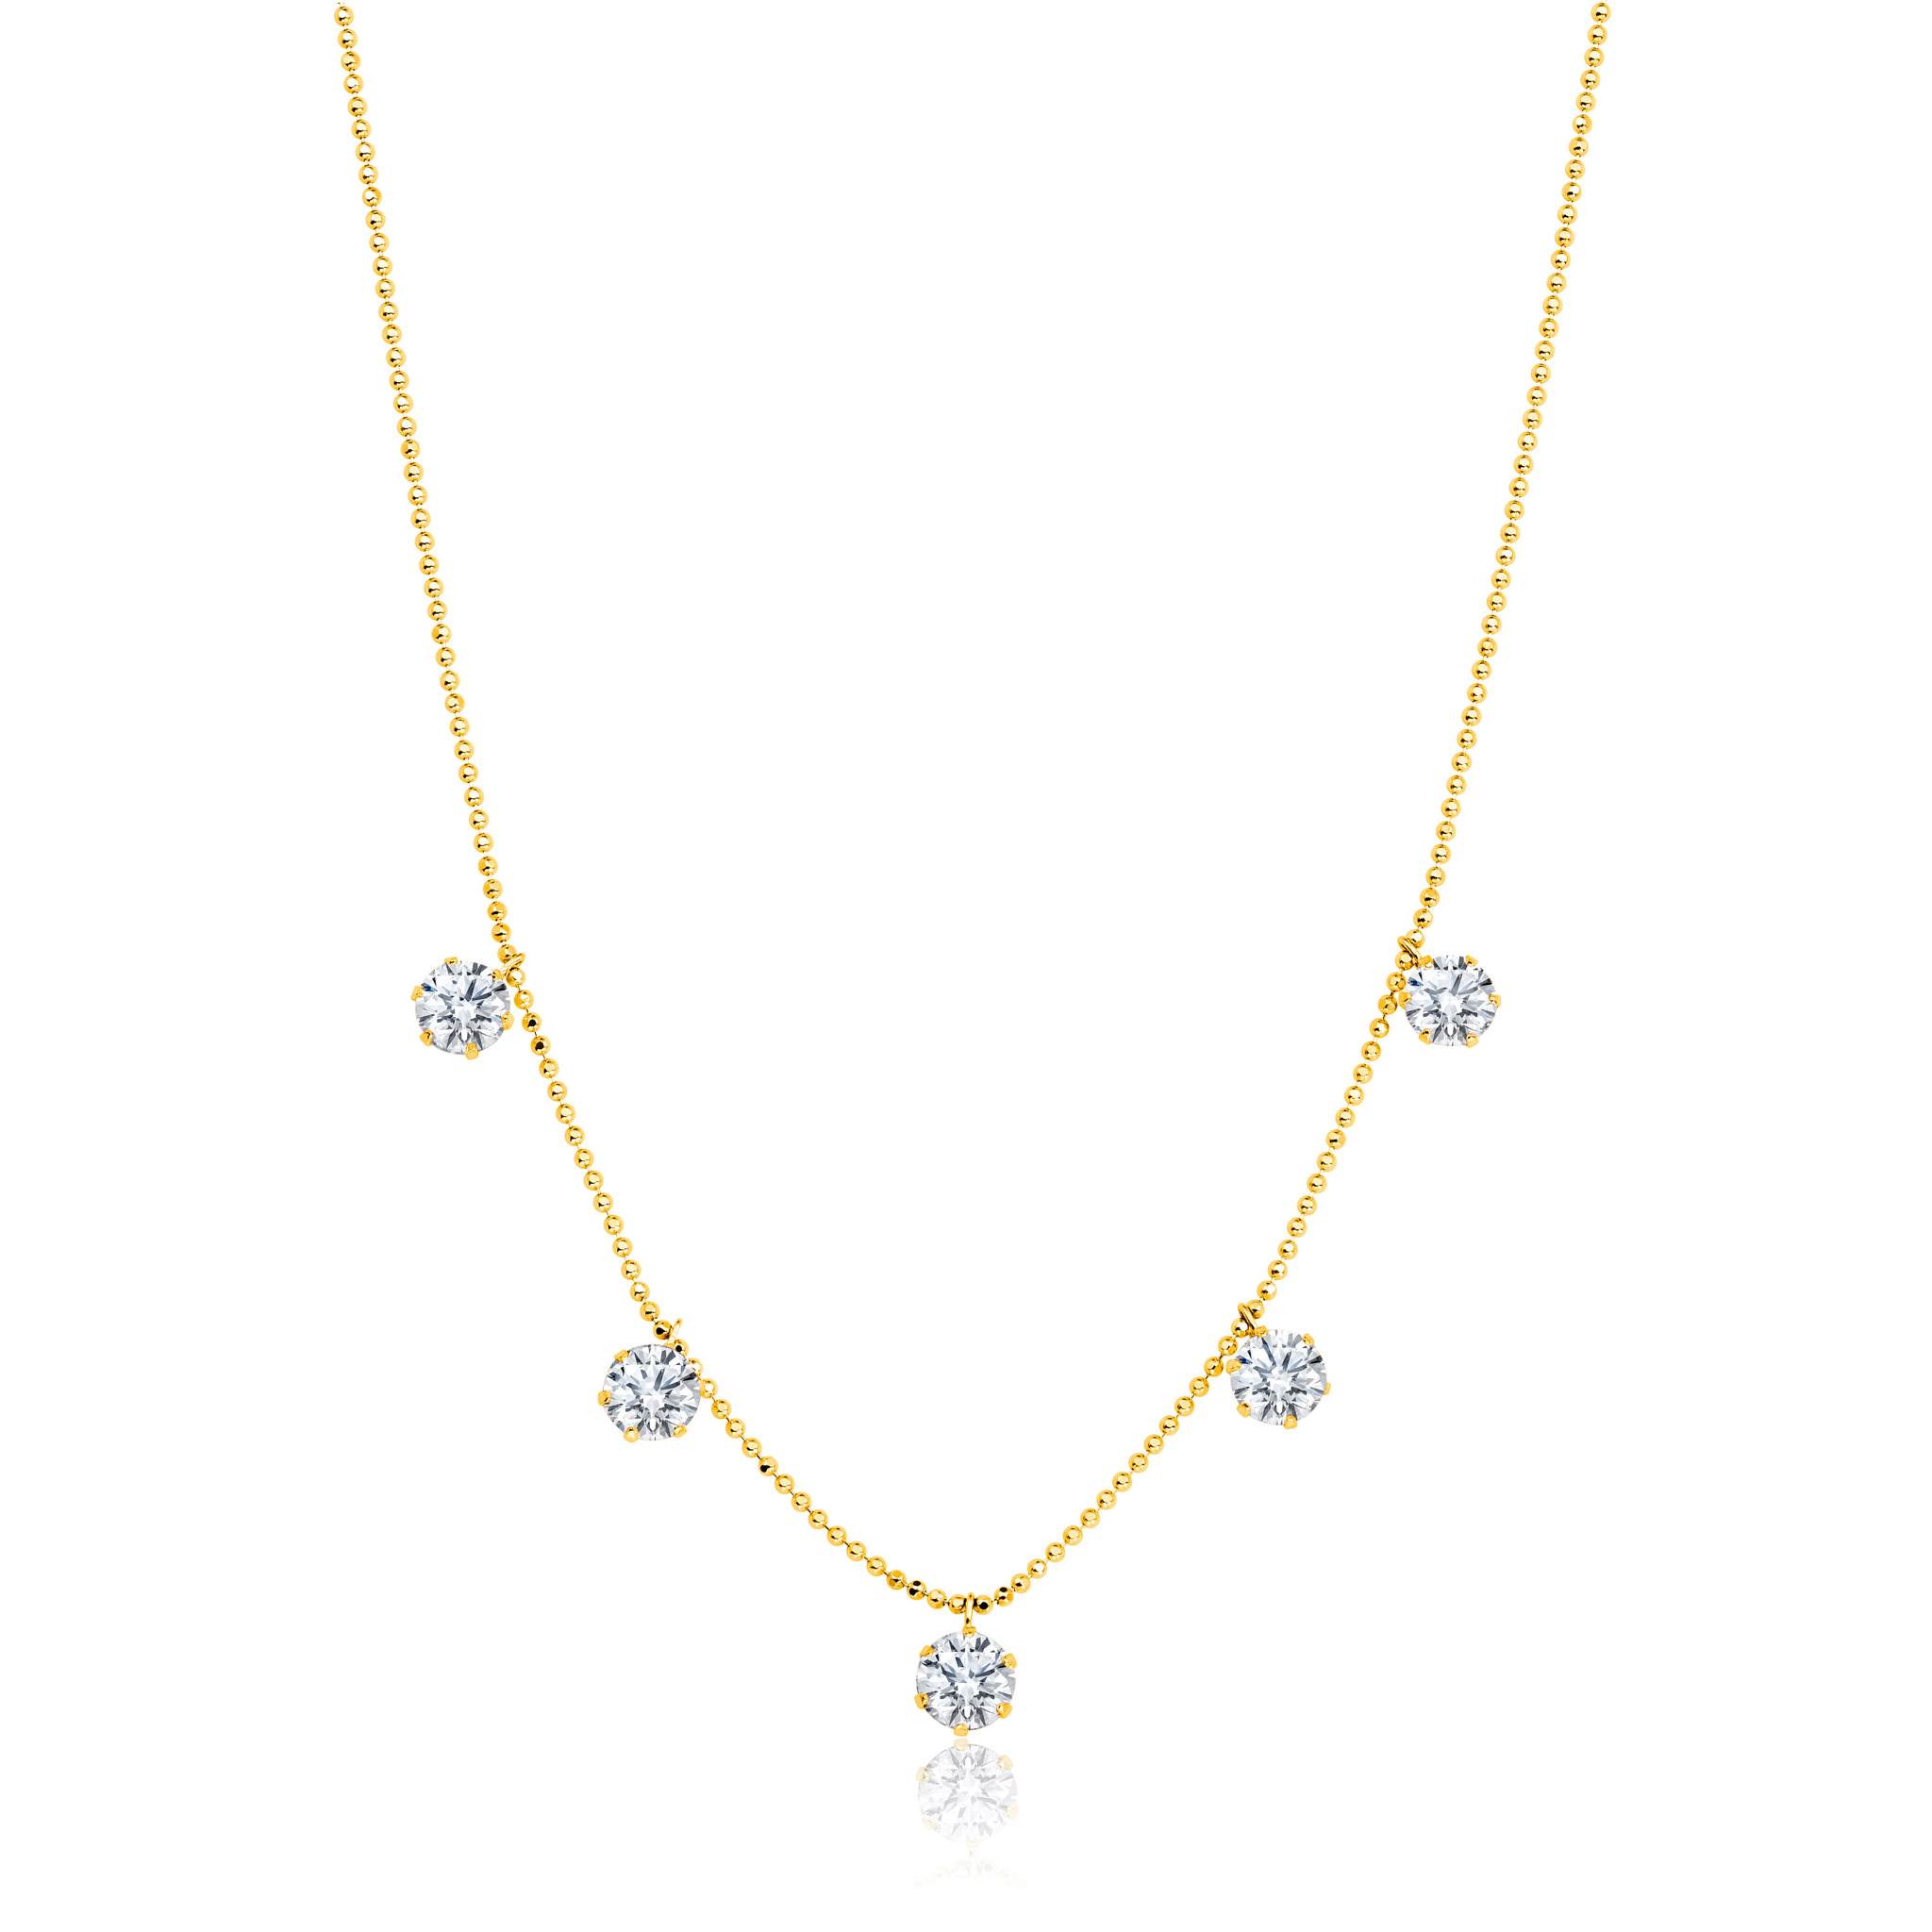 Graziela Gems - Necklace - 3.5ct Floating Diamond Necklace - Yellow Gold